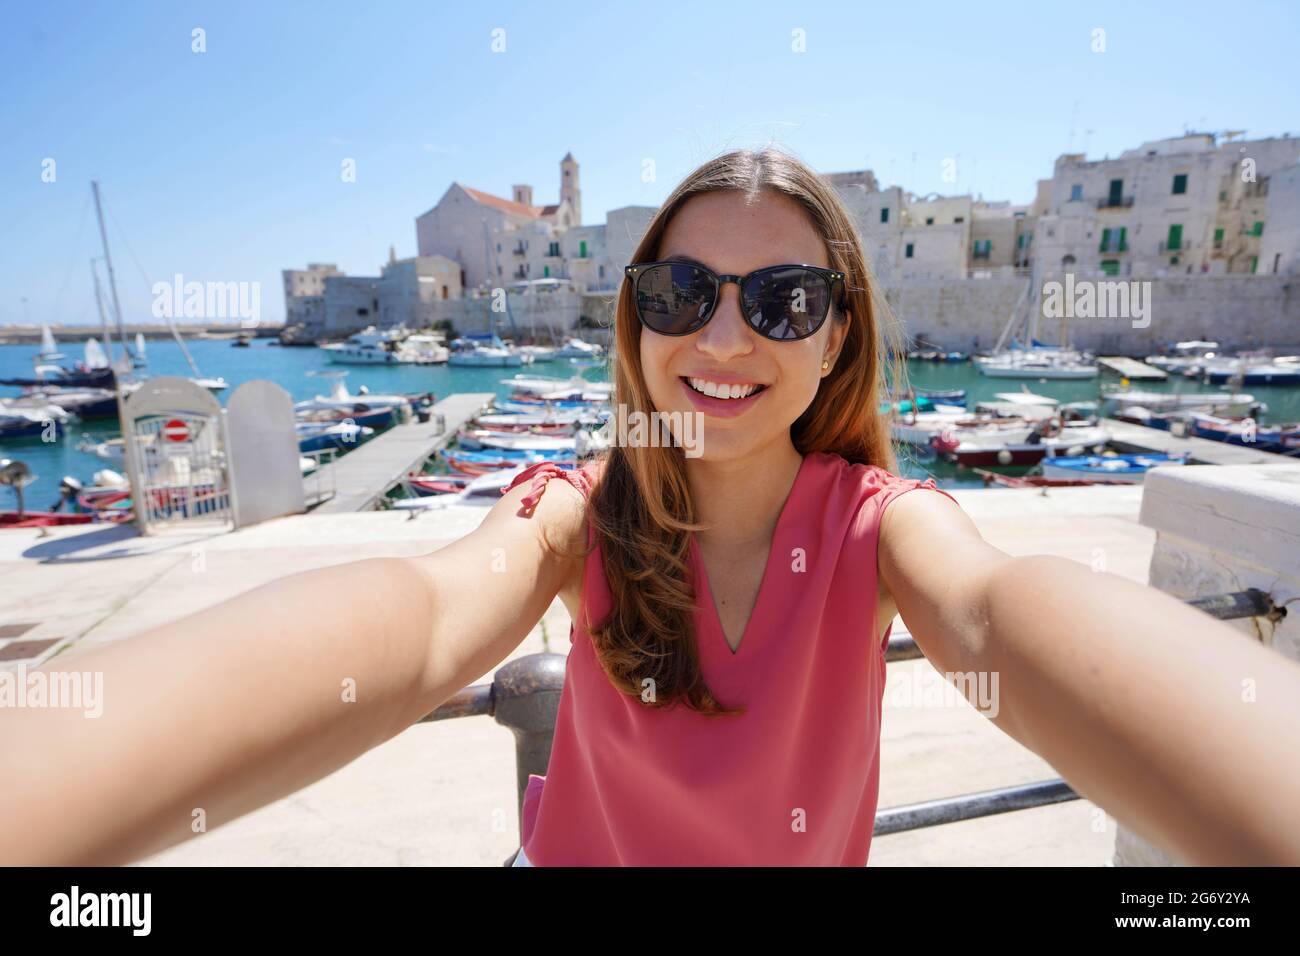 Happy beautiful woman with sunglasses taking selfie smiling at the camera with the old town of Giovinazzo on the background in southern Italy Stock Photo